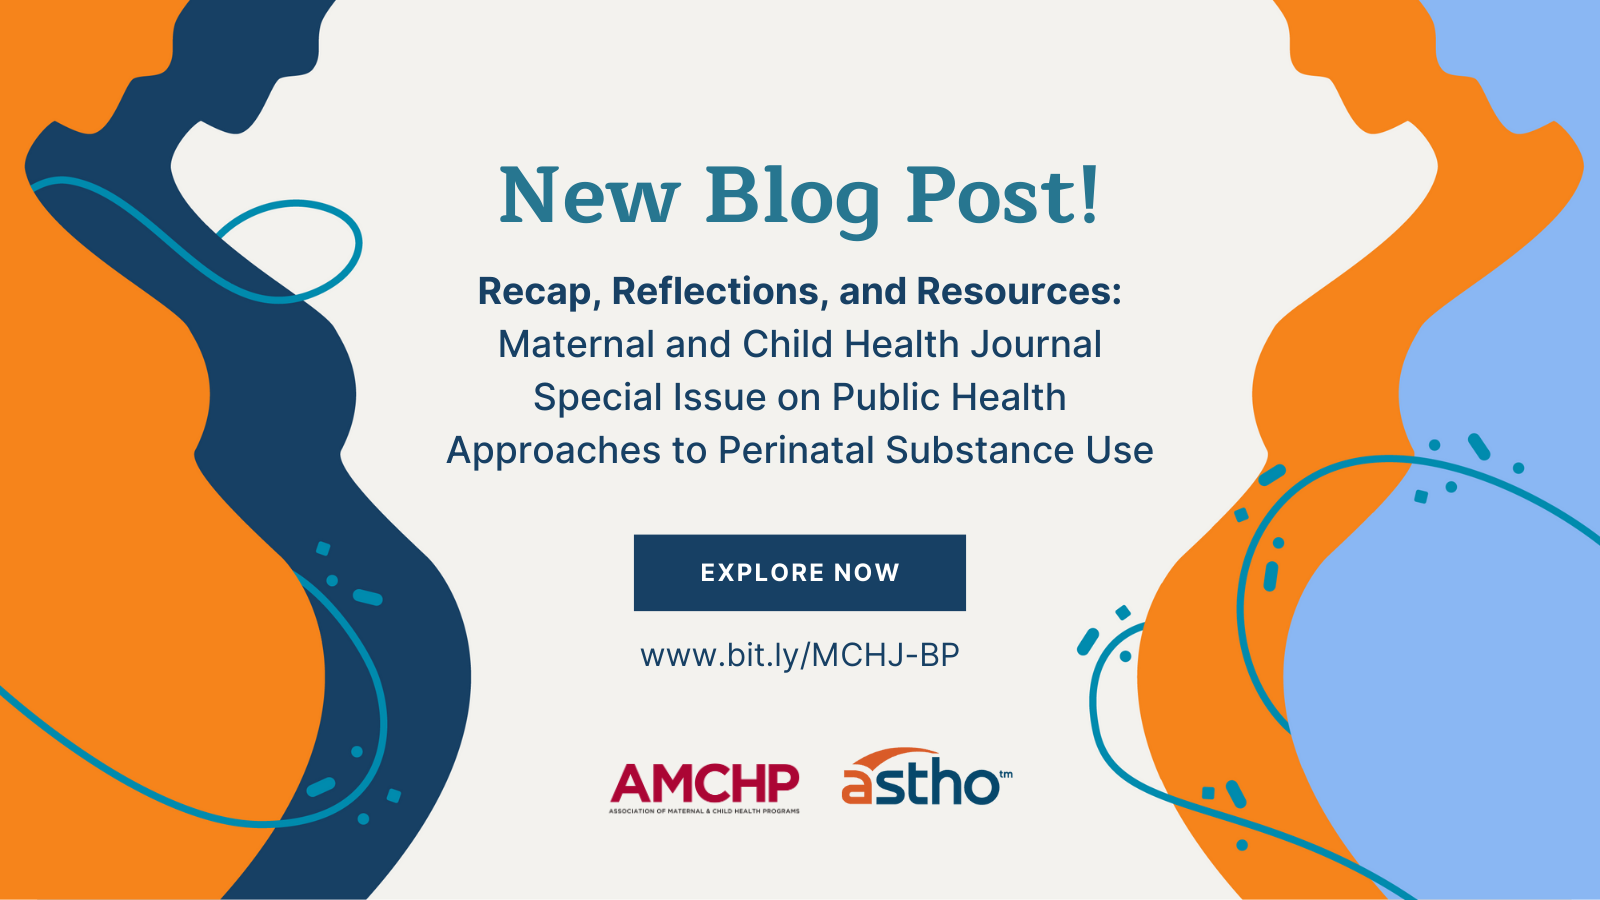 Graphic alerting of new blog post! Recap, Reflections, and Resources: Maternal and Child Health Journal Special Issue on Public Health Approaches to Perinatal Substance Use. Explore now: bit.ly/MCHJ-BP